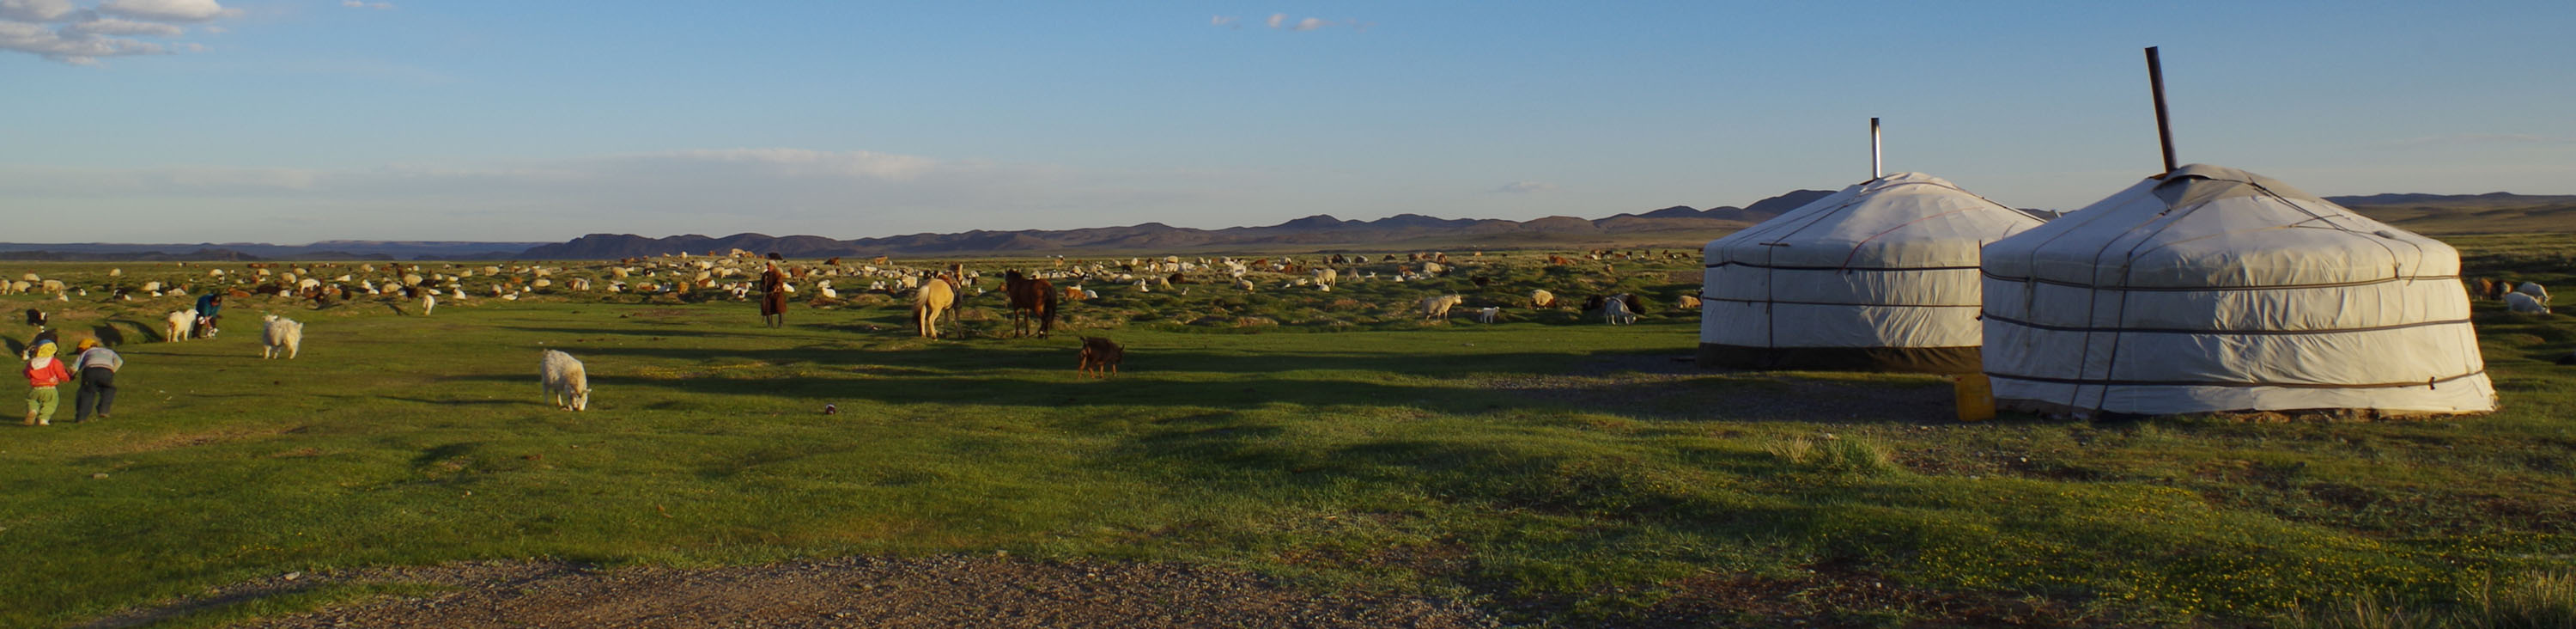 yurts and cattle